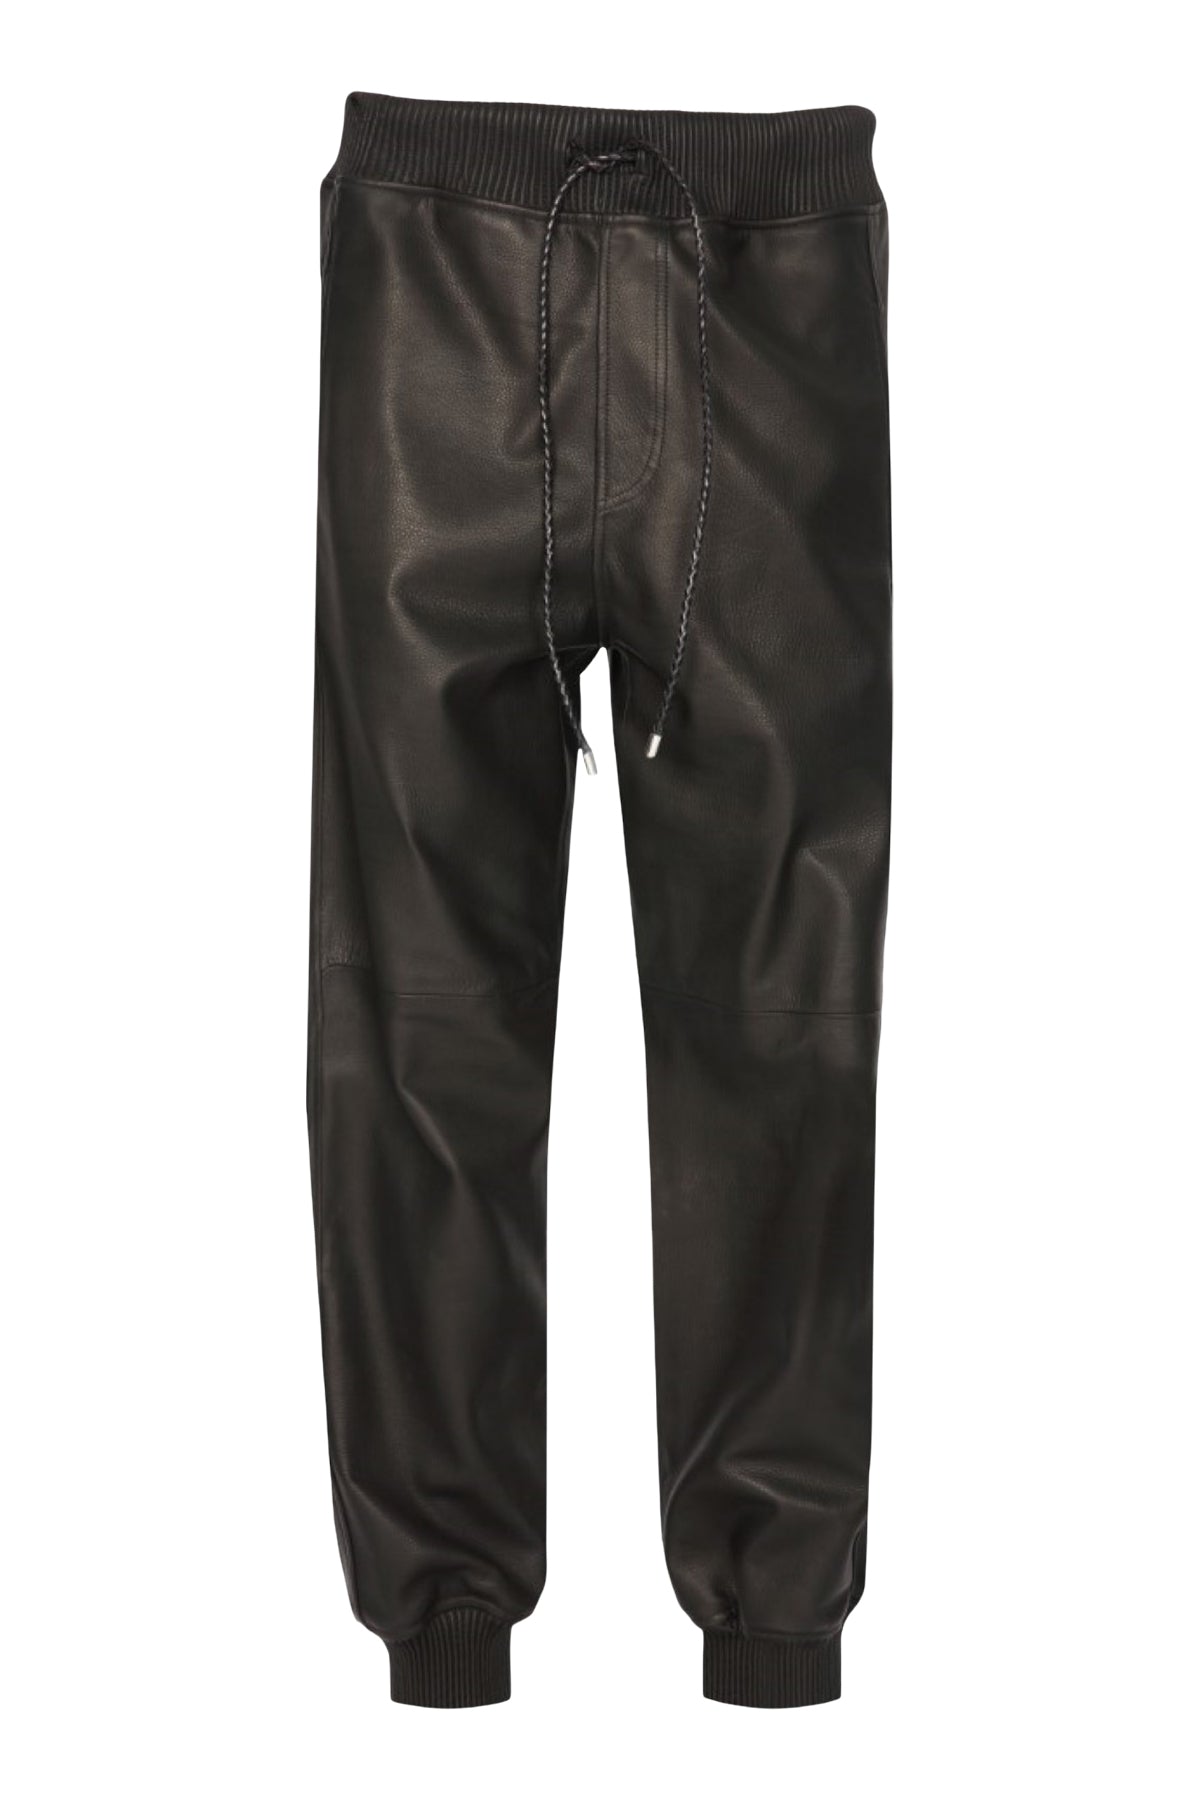 Owen/Baby G Leather Track Pants